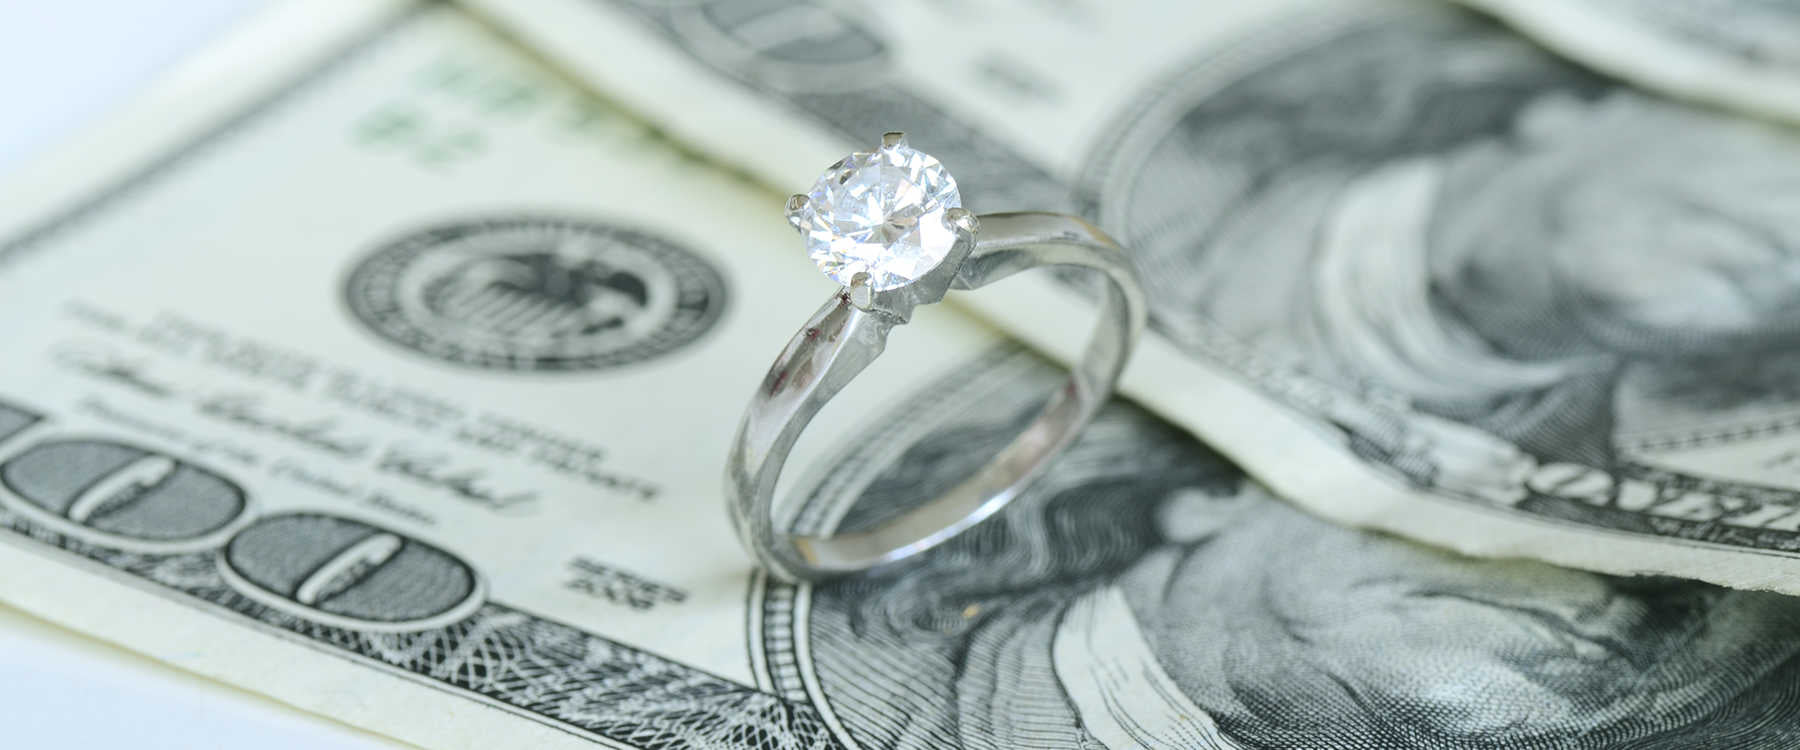 Diamond solitaire engagement ring on money